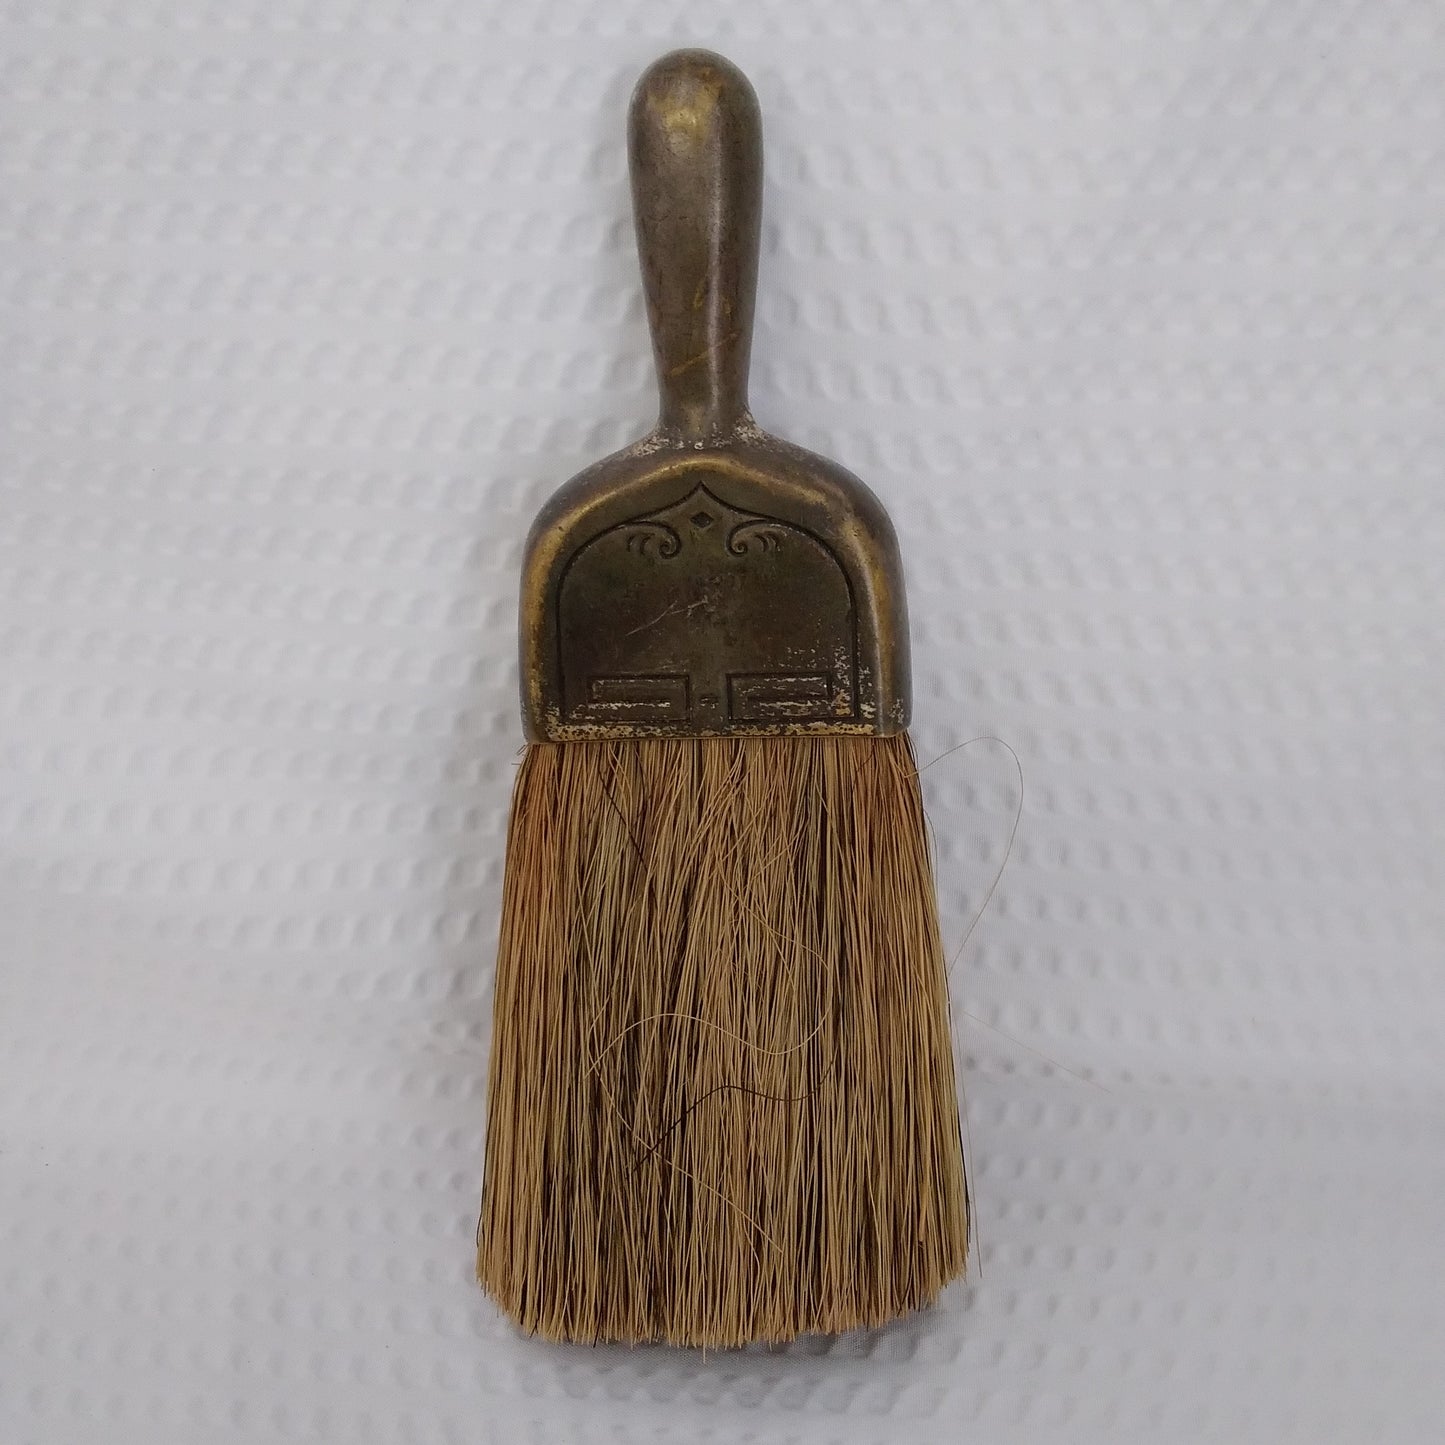 Vintage Pocket/Barber Brush with Metal Handle and Leather Case